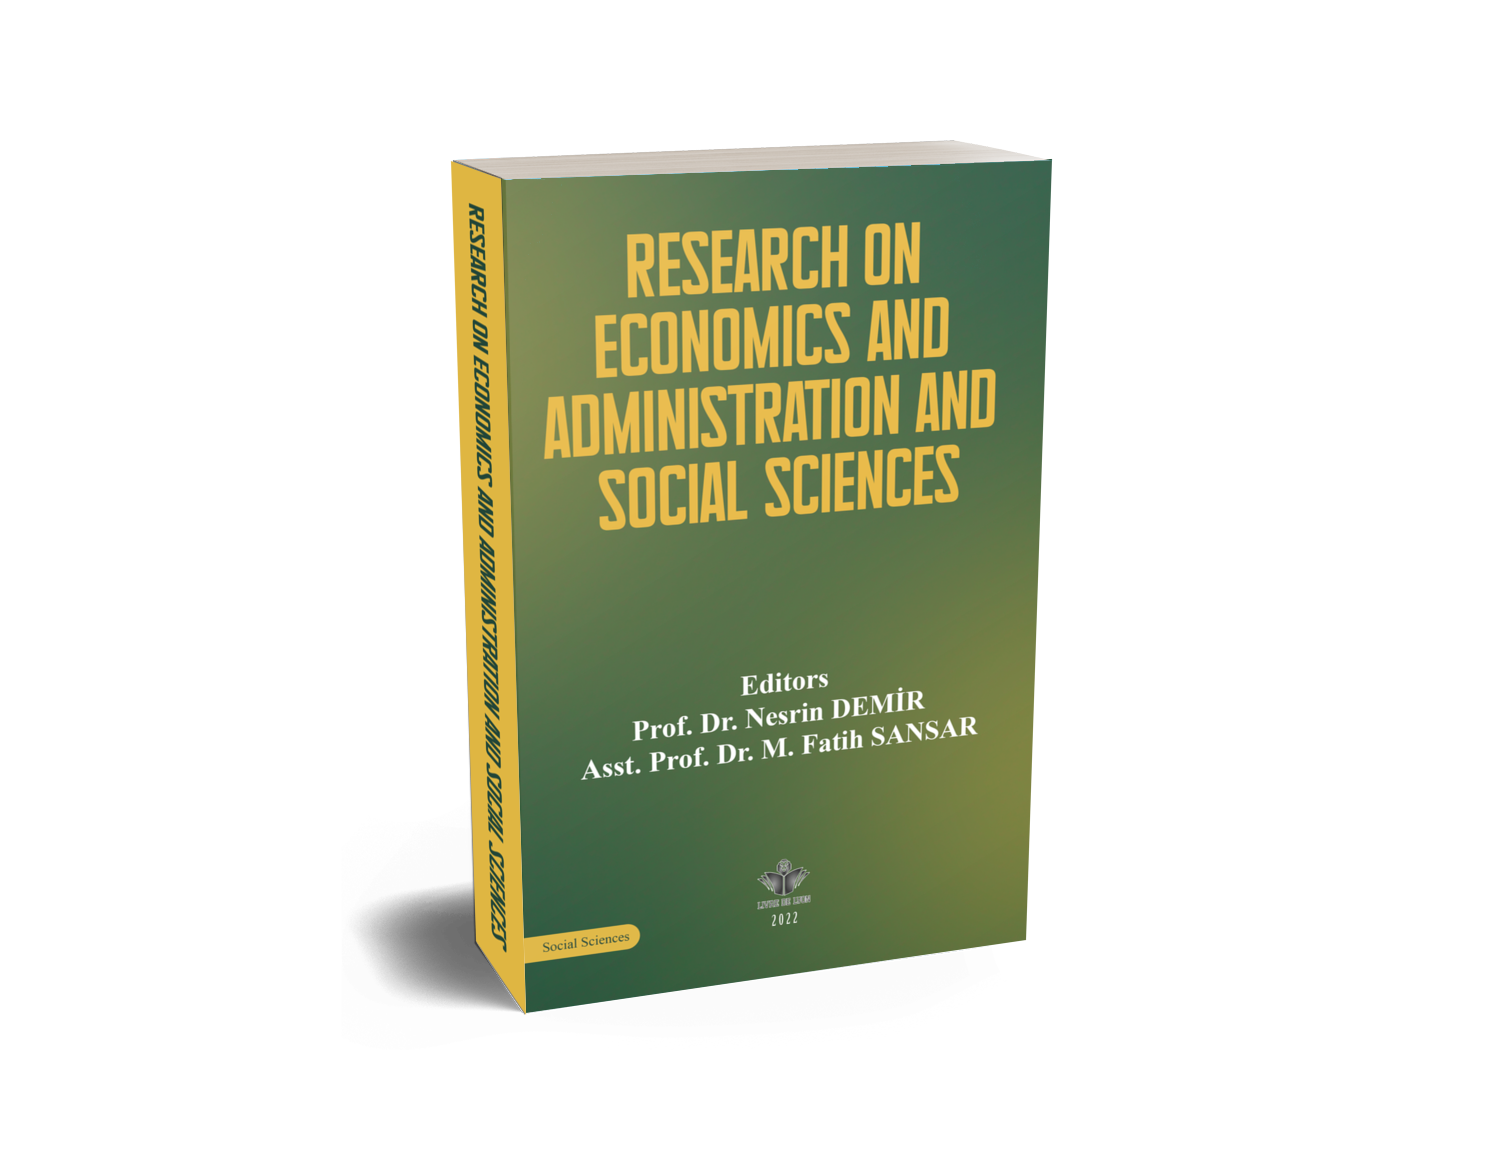 Research on Economics and Administration and Social Sciences